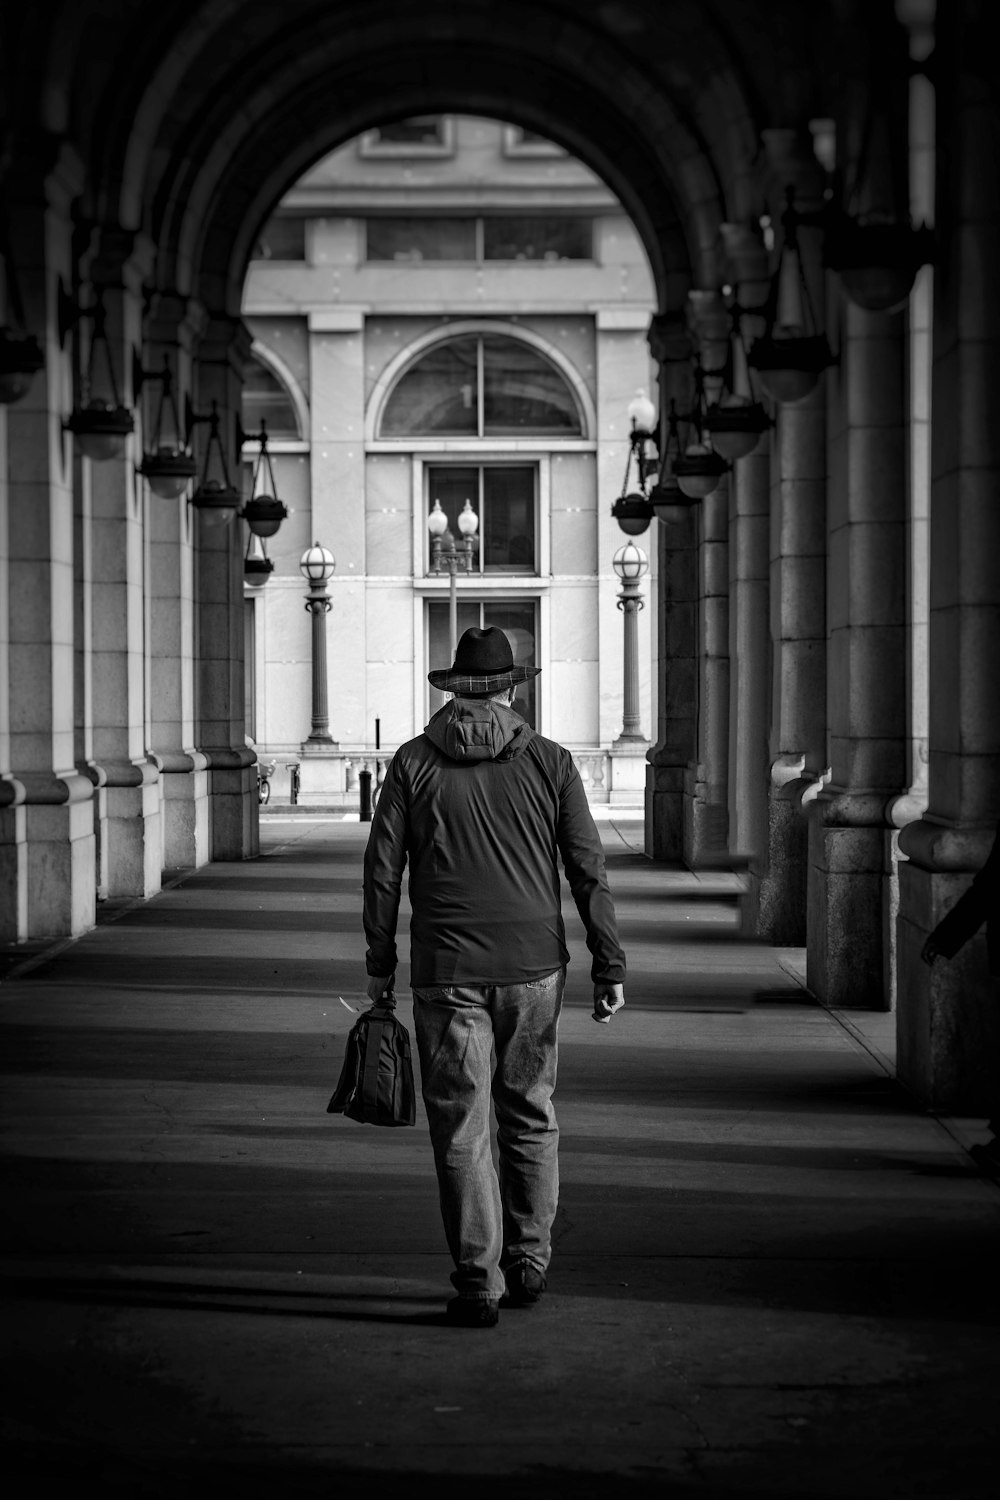 man in black jacket and pants standing on sidewalk in grayscale photography